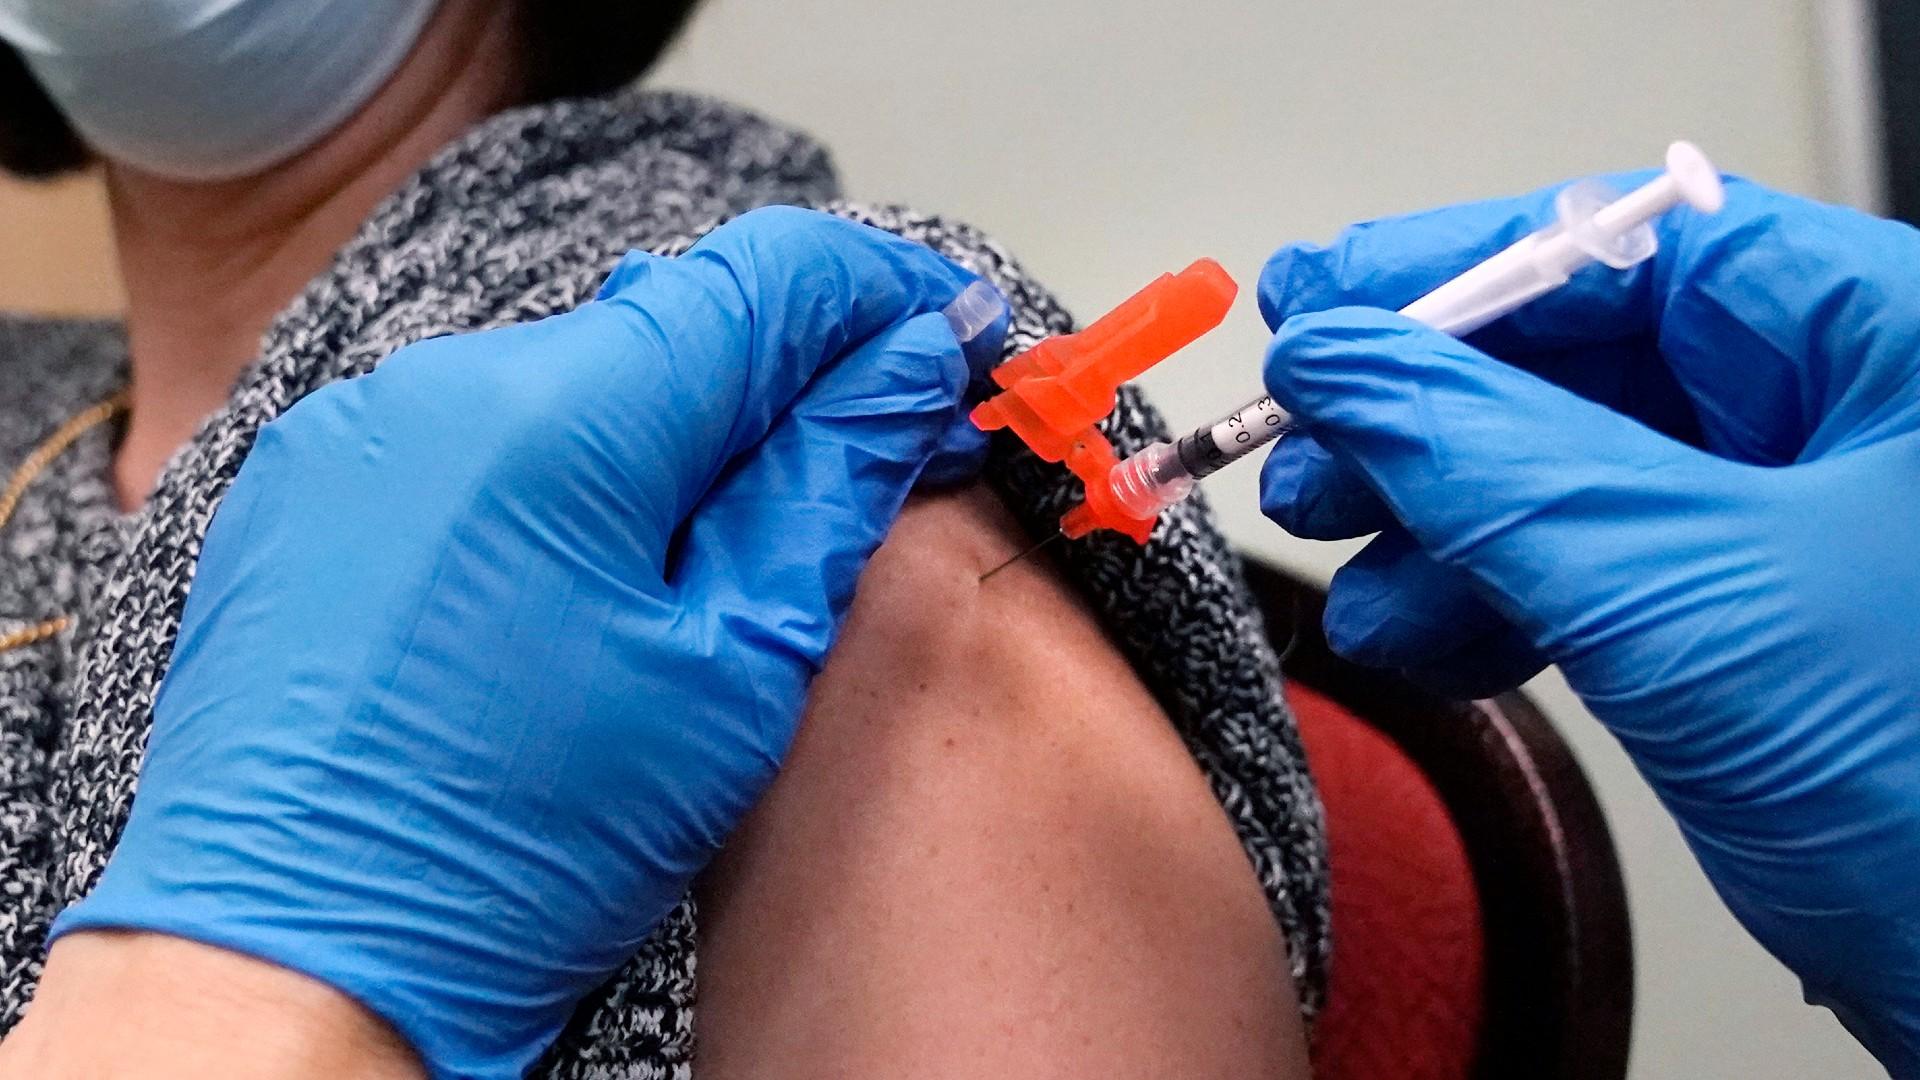 A woman receives a COVID-19 vaccine injection by a pharmacist at a clinic in Lawrence, Mass., on Wednesday, Dec. 29, 2021. (AP Photo / Charles Krupa, File)